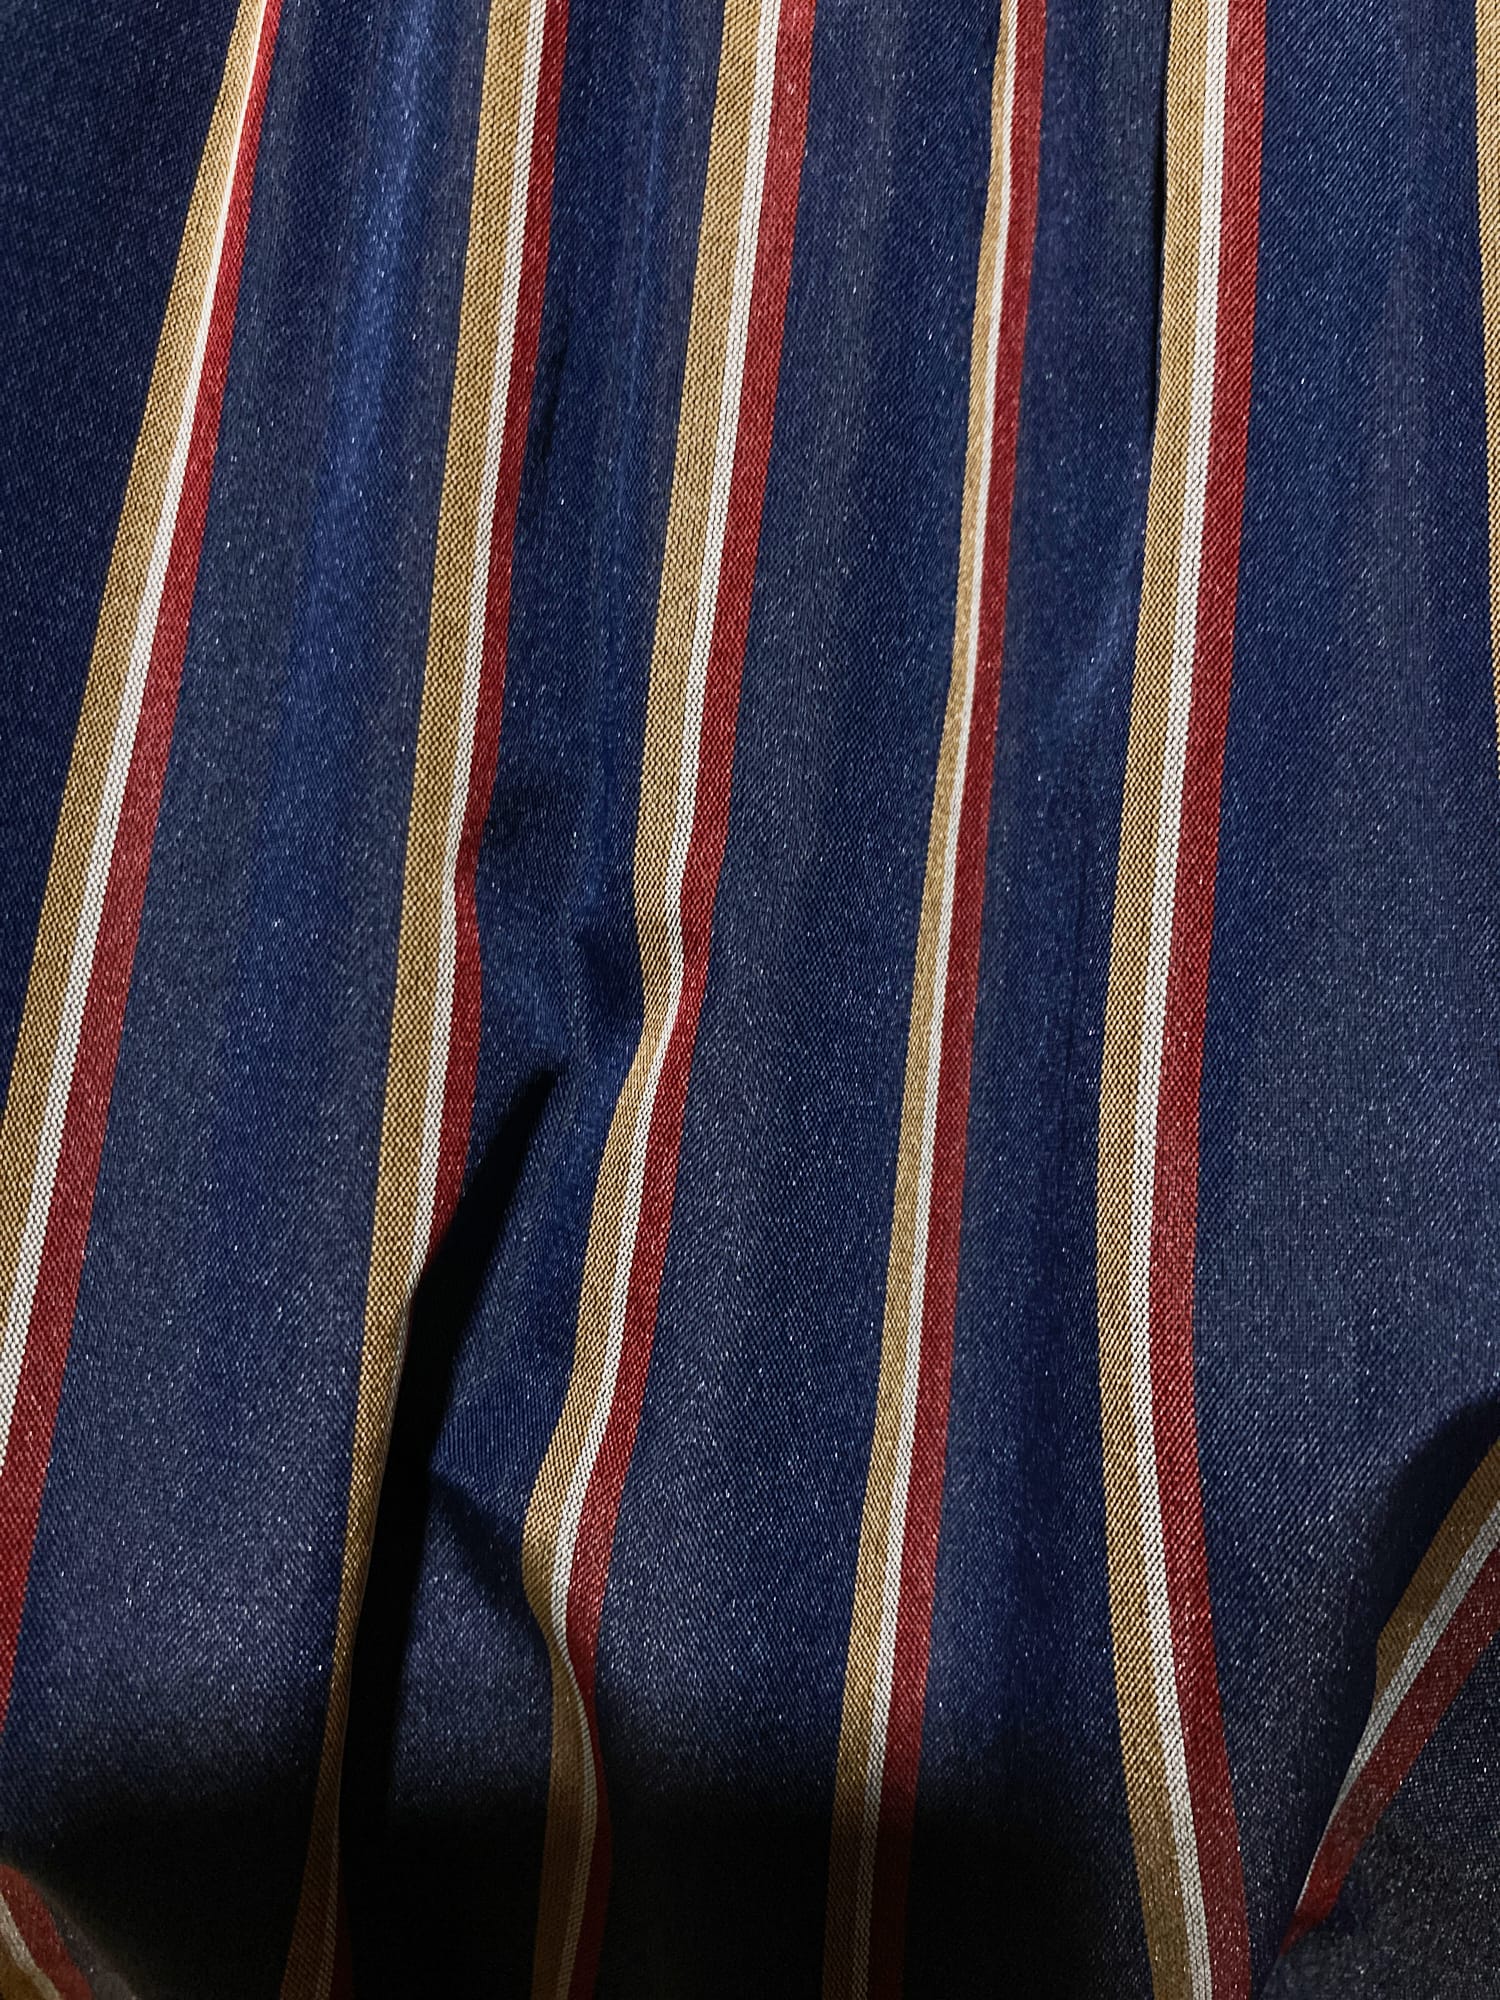 Wrinqle Inoue Pleats navy red yellow striped polyester skirt with pleated waist